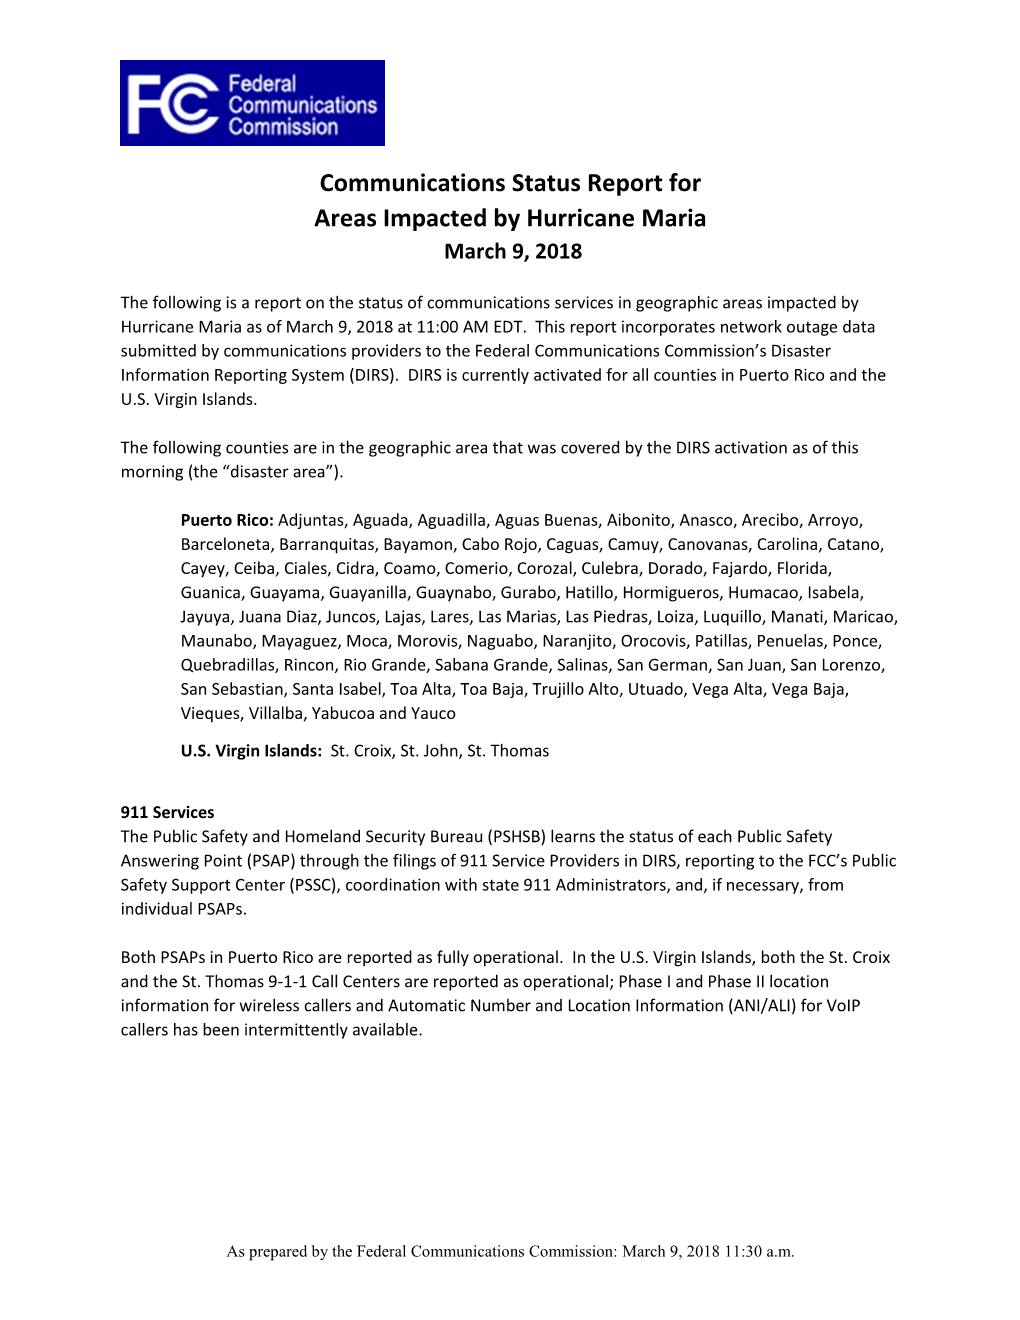 Communications Status Report for Areas Impacted by Hurricane Maria March 9, 2018